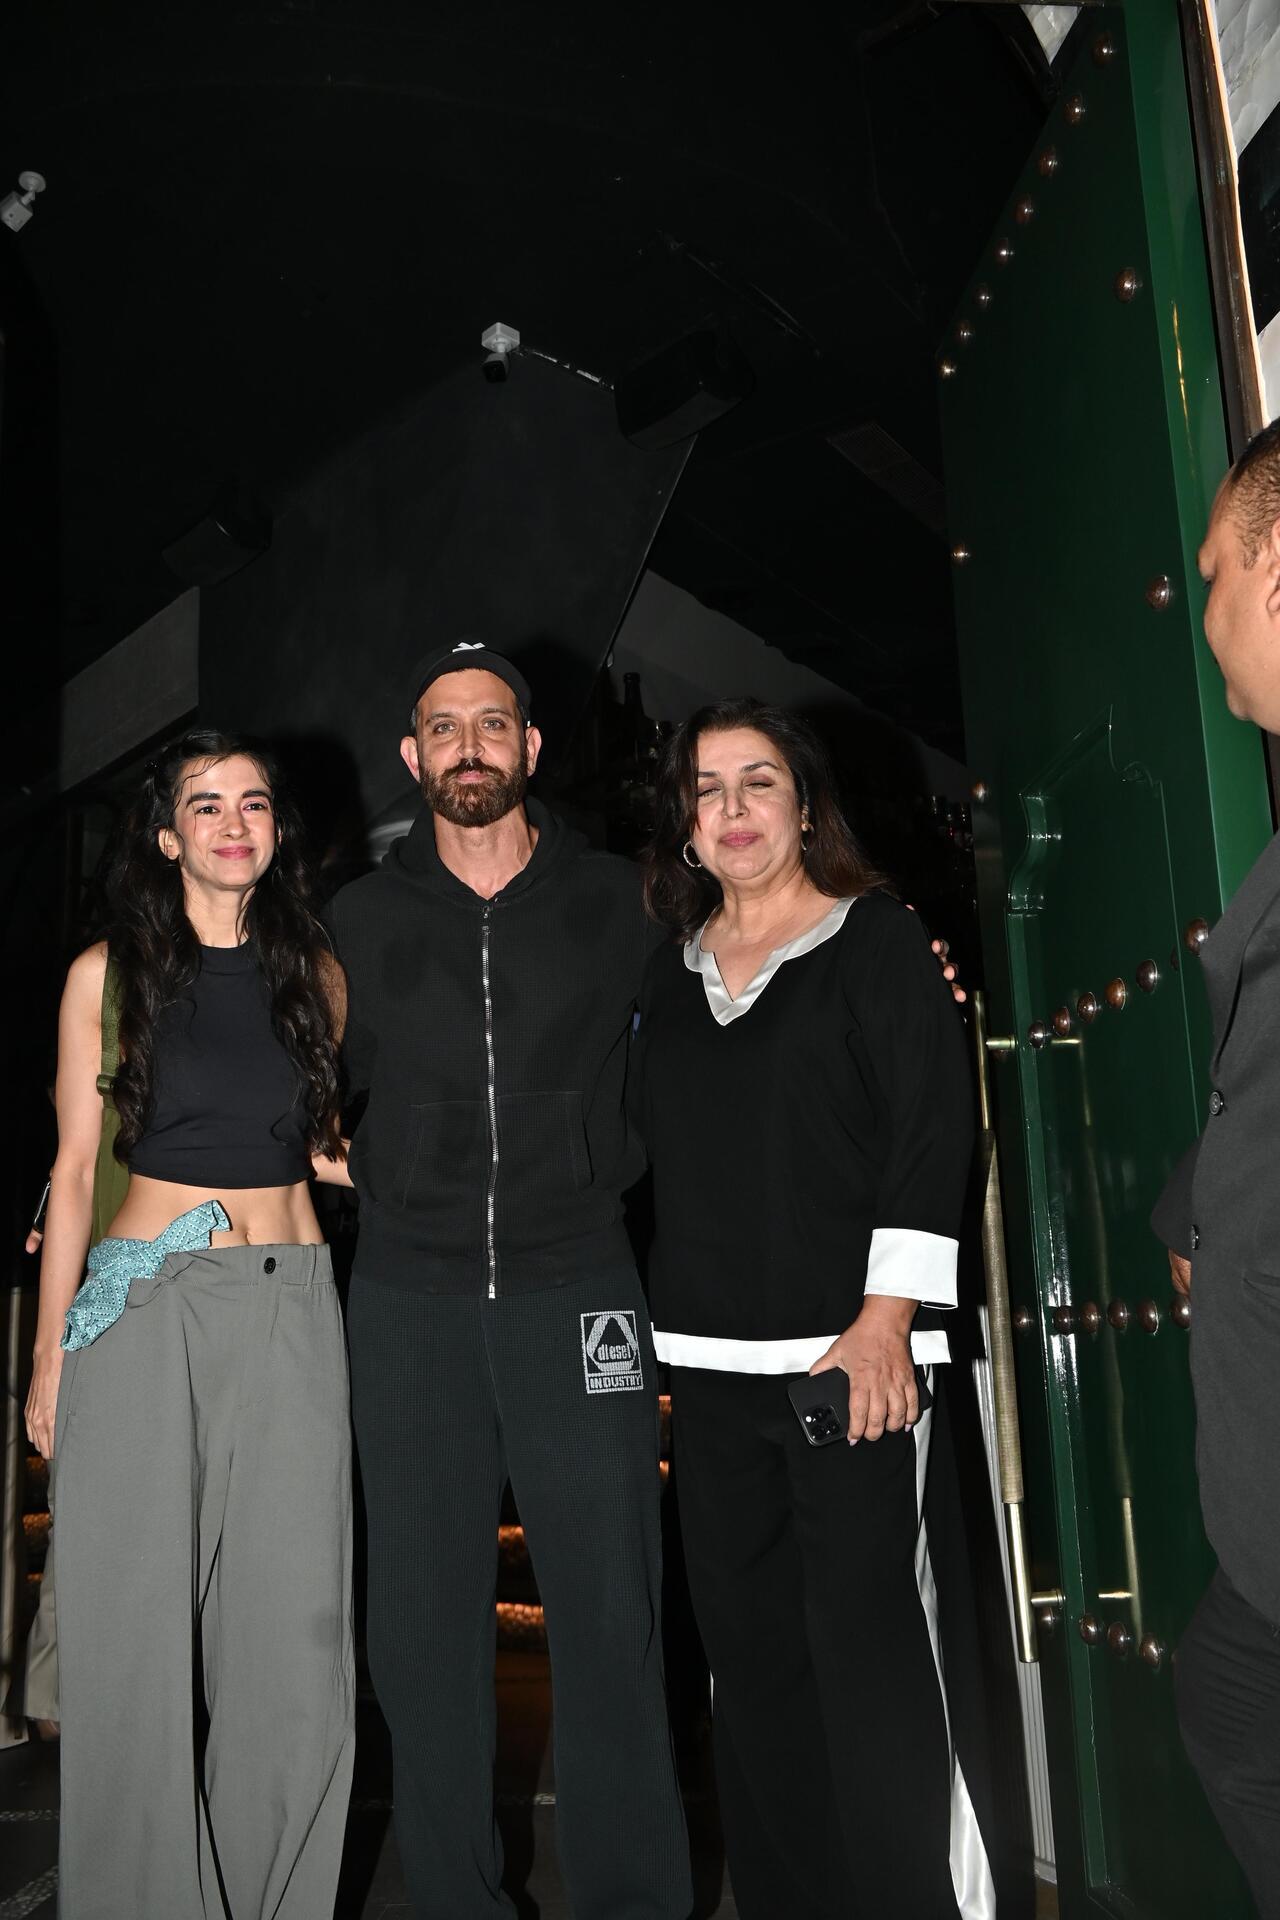 Present for the bash were the much-in-love couple Saba Azad and Hrithik Roshan. They posed alongside Farah Khan.